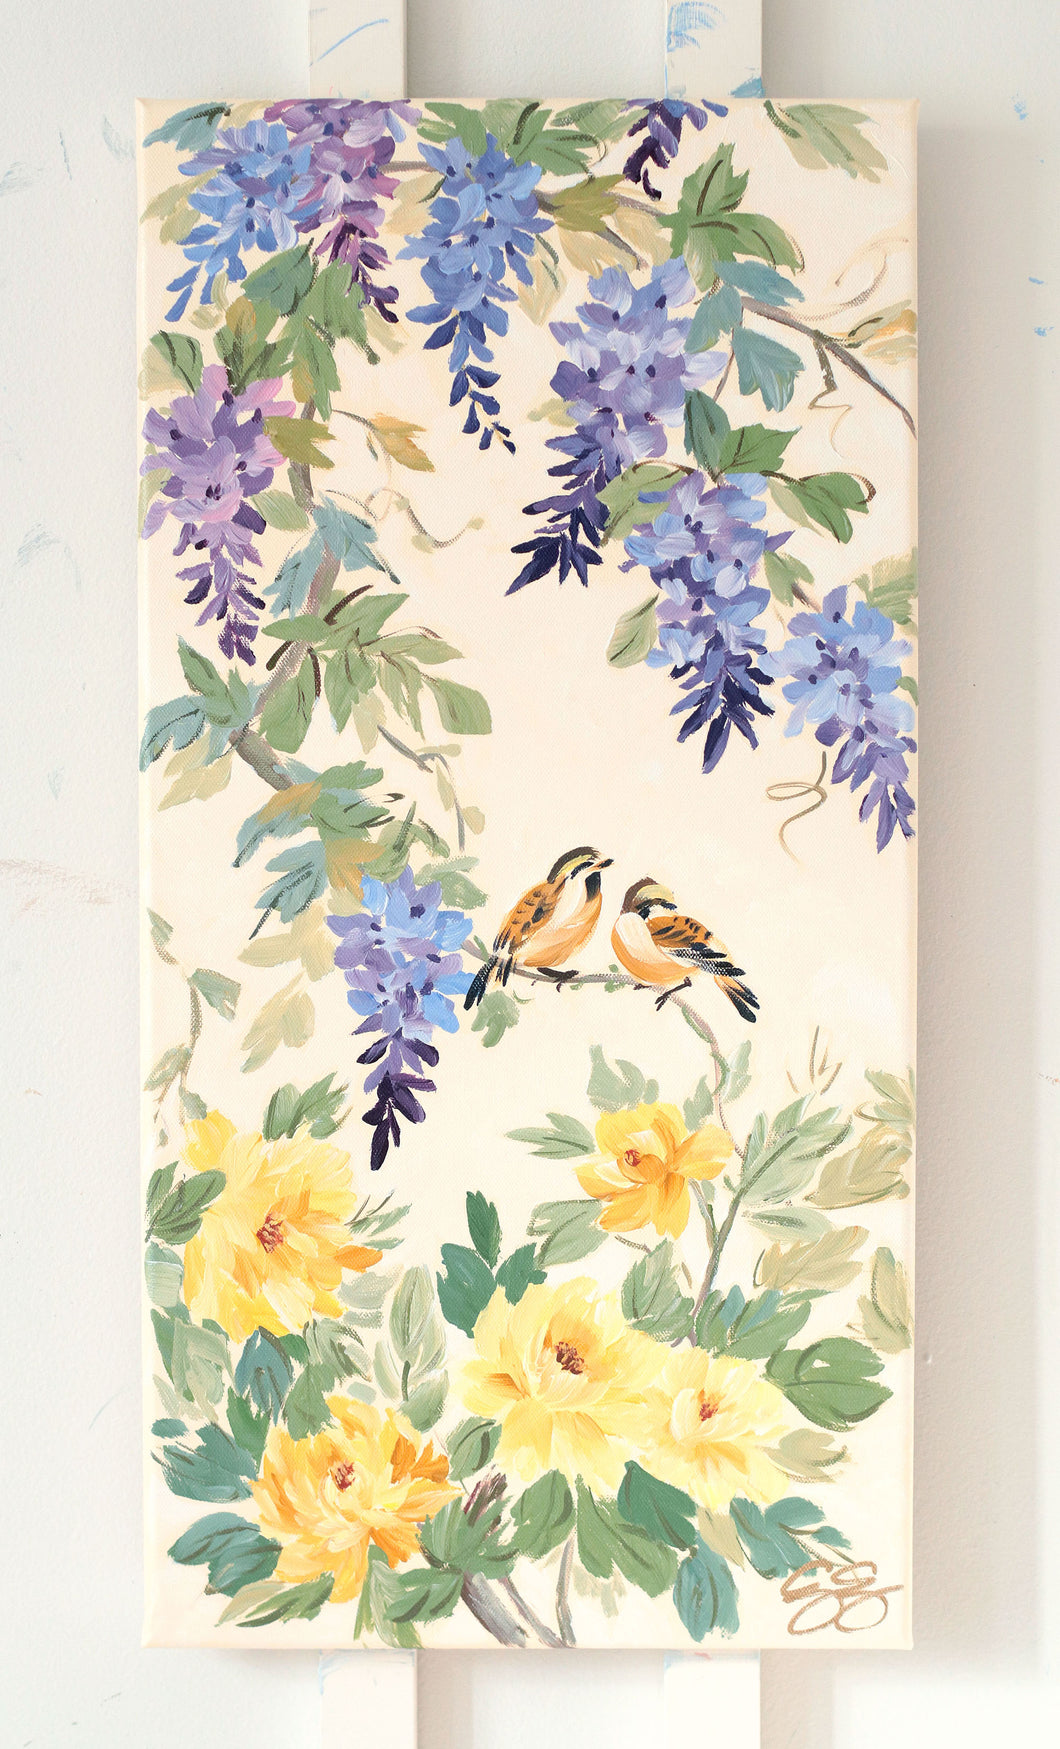 Chinoiserie painting of wisteria and yellow peonies, 